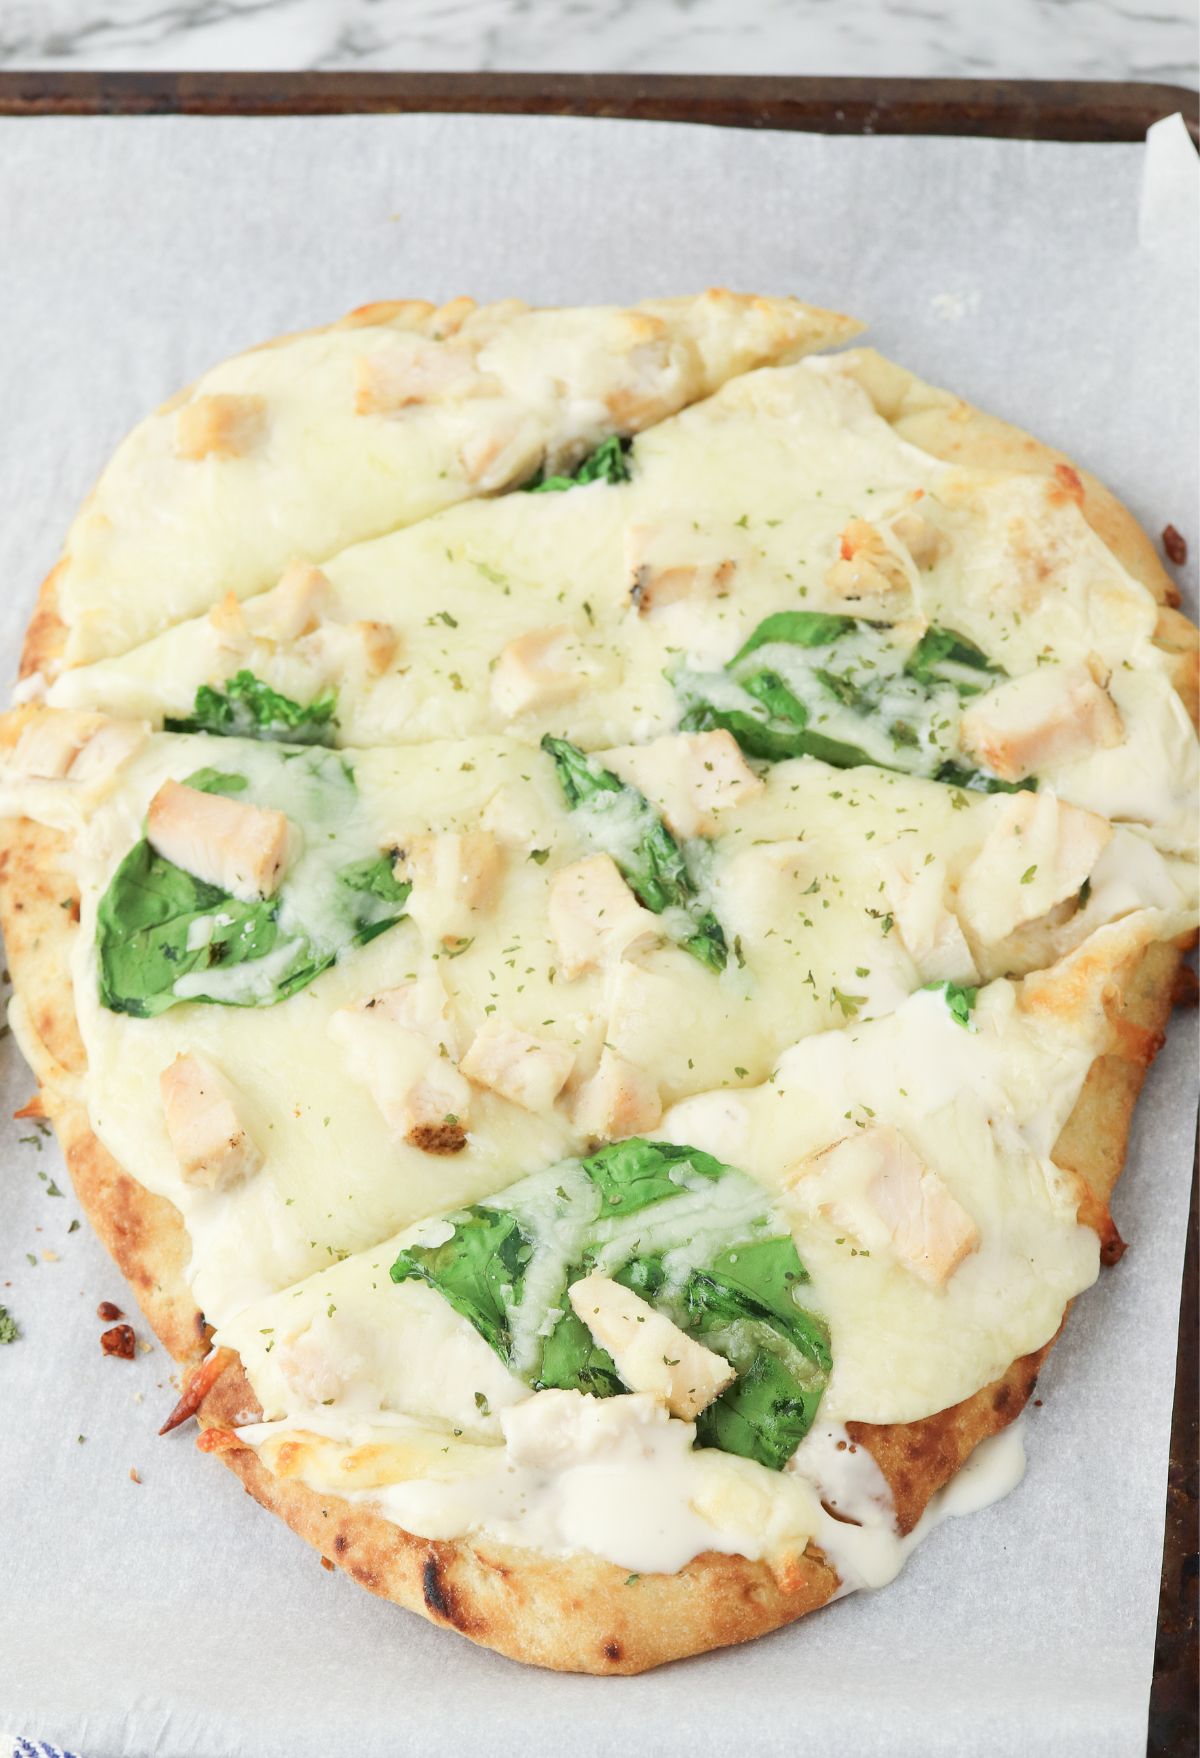 A pizza with chicken and spinach on it.